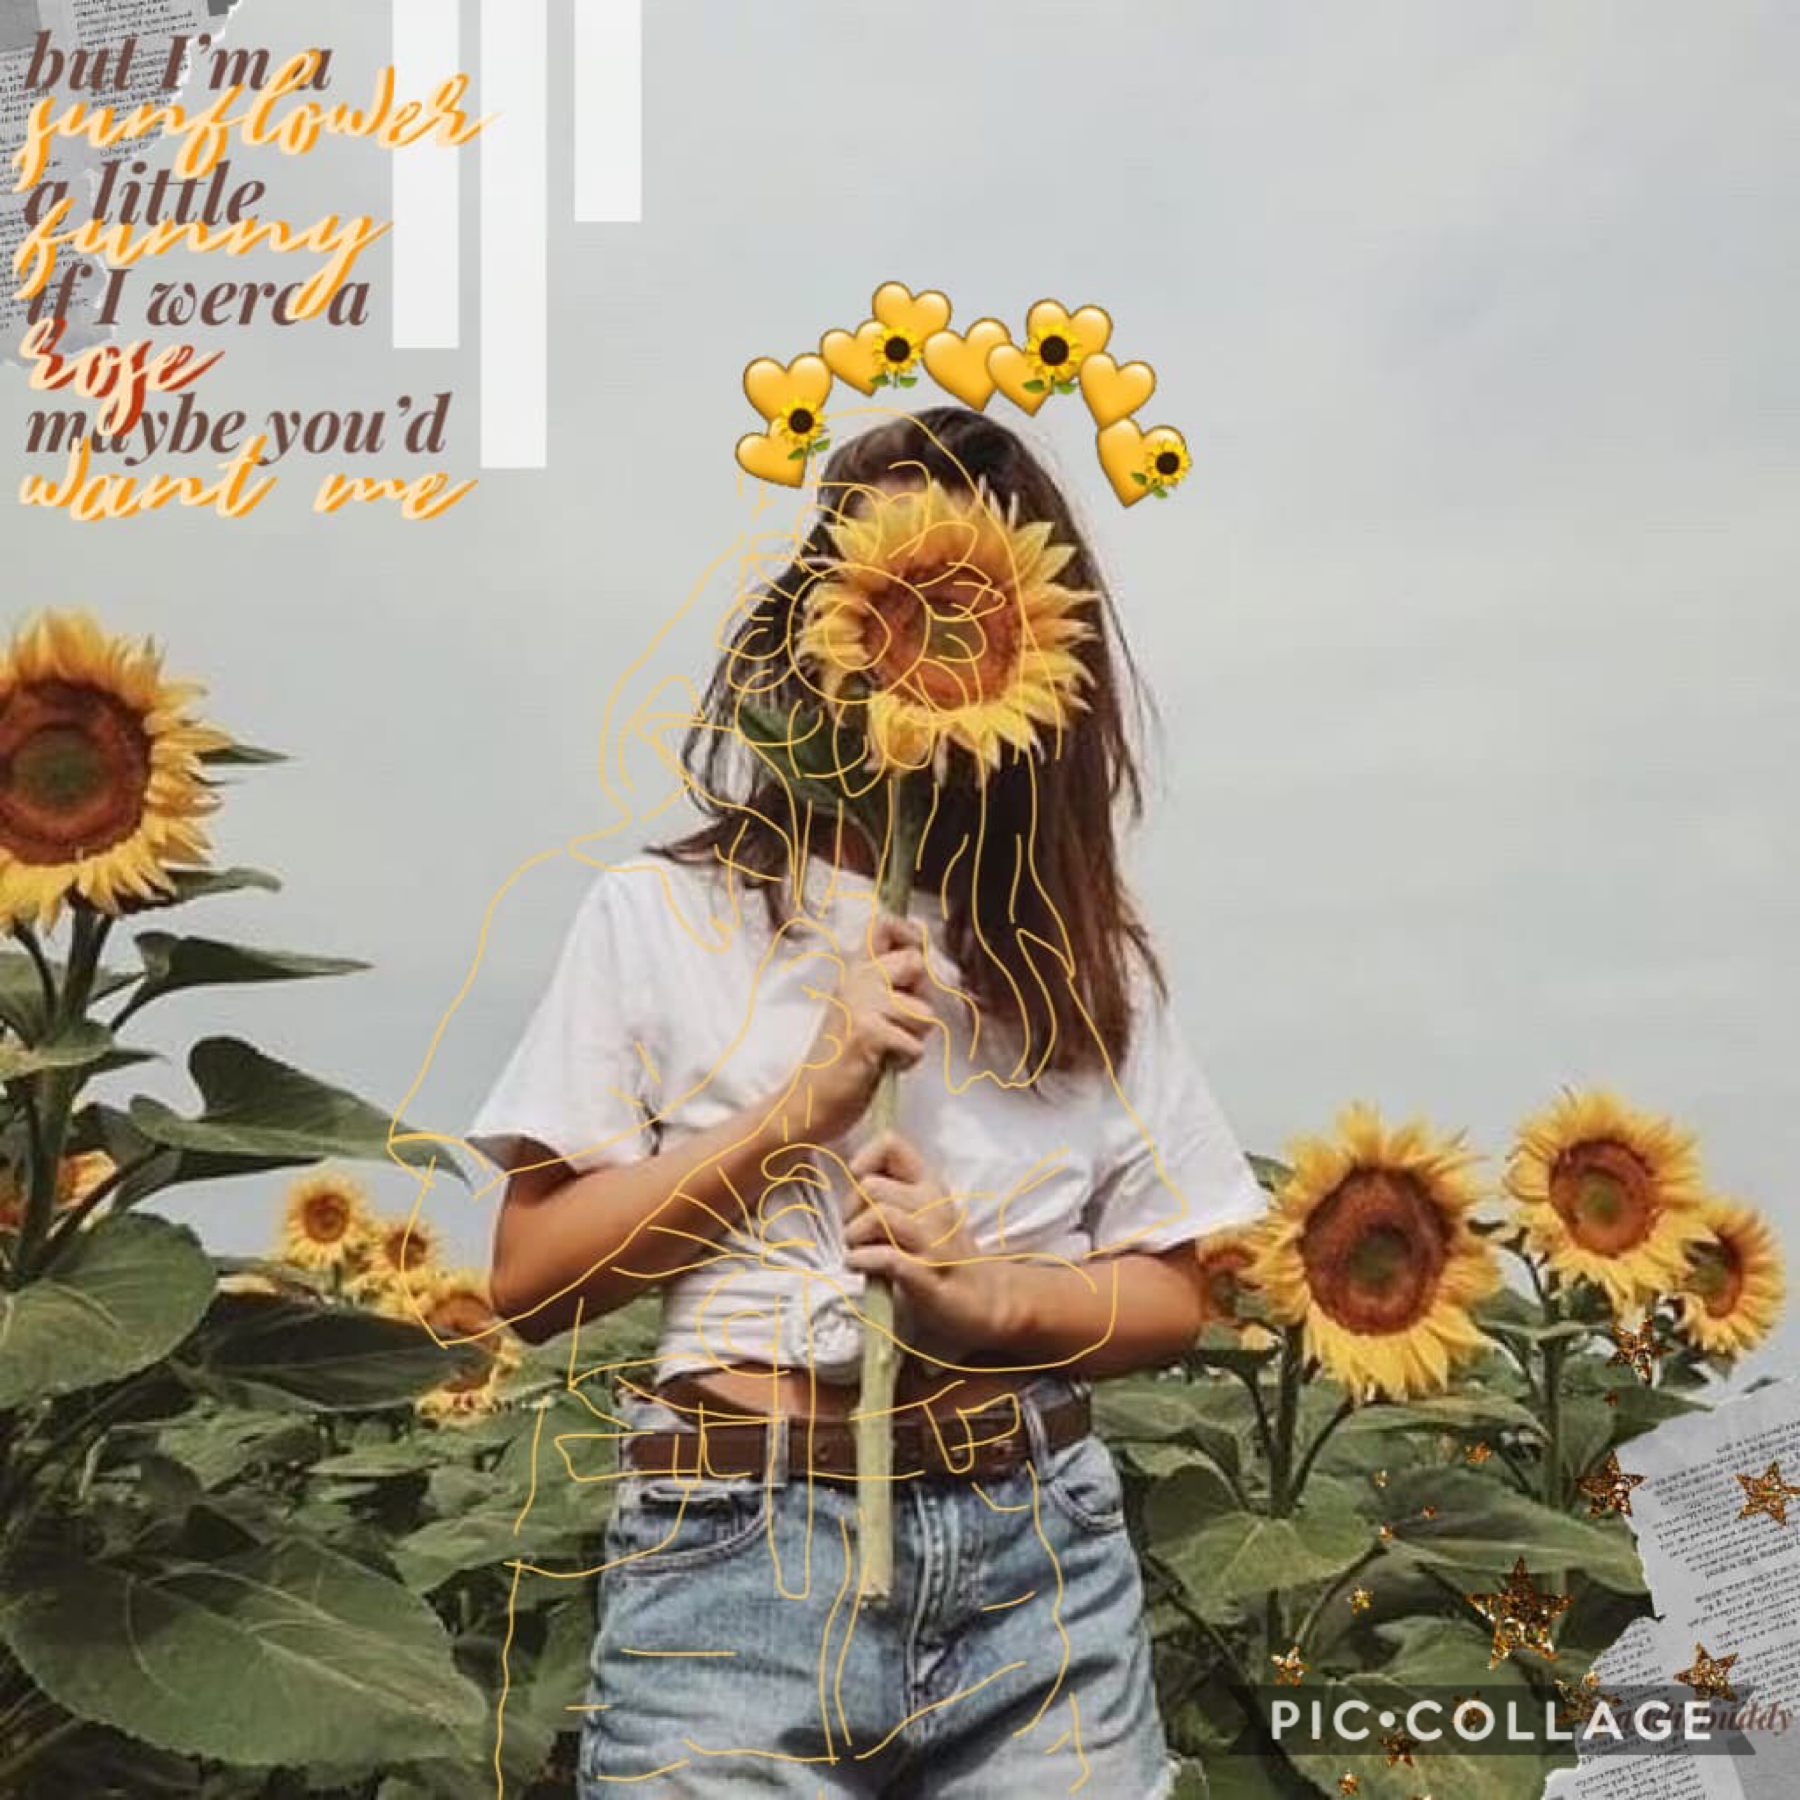 4.23.20
Hey guys! I did this for a contest for aesthetic sunflower and thought I’d post it 🥰